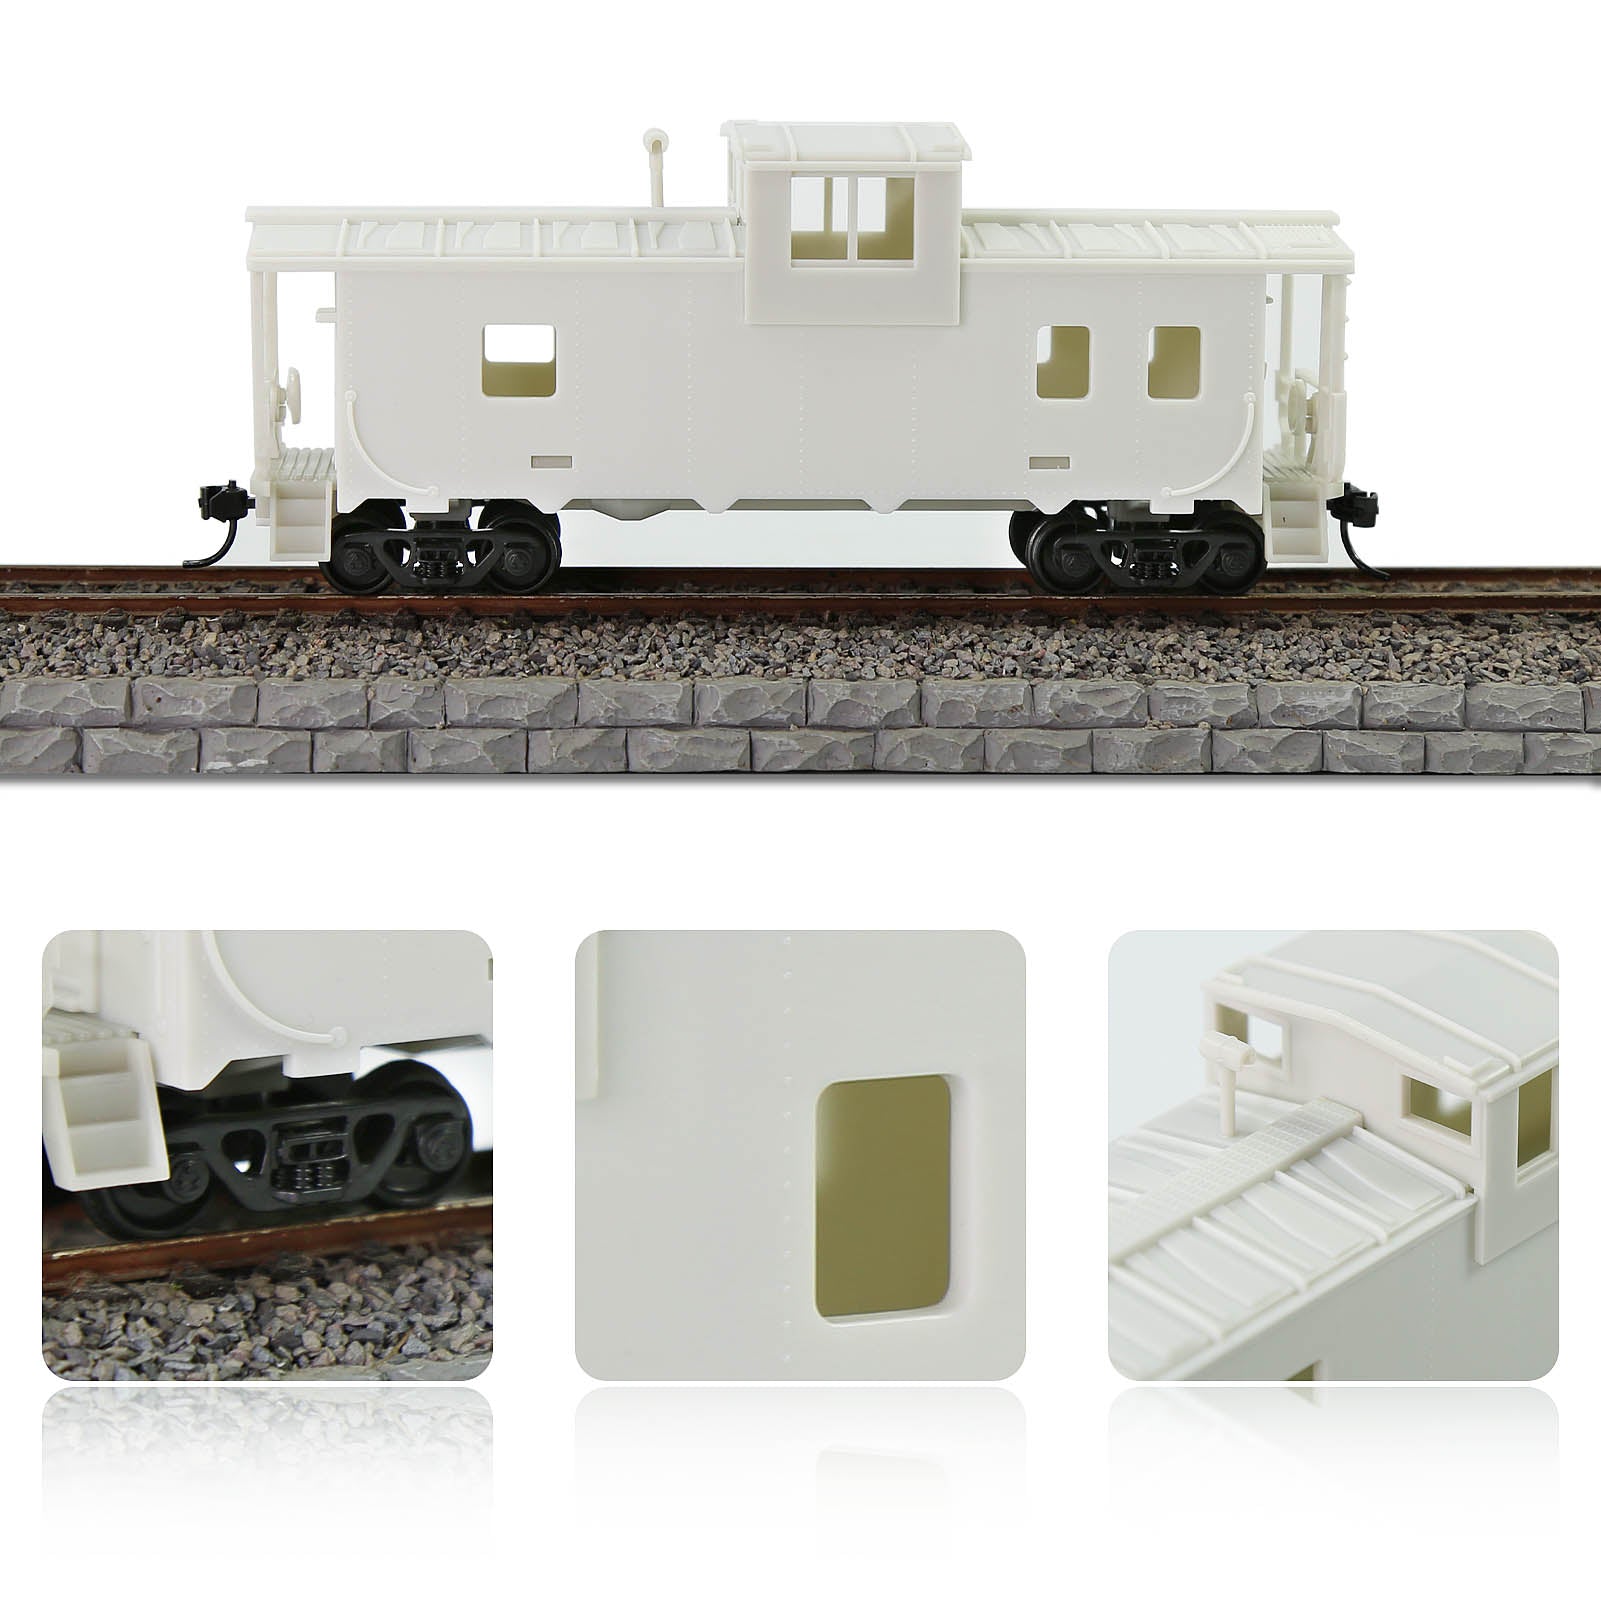 C8763JJ 1pc HO Scale 1:87 Blank Unpainted Unassembled 36' Wide Vision Caboose